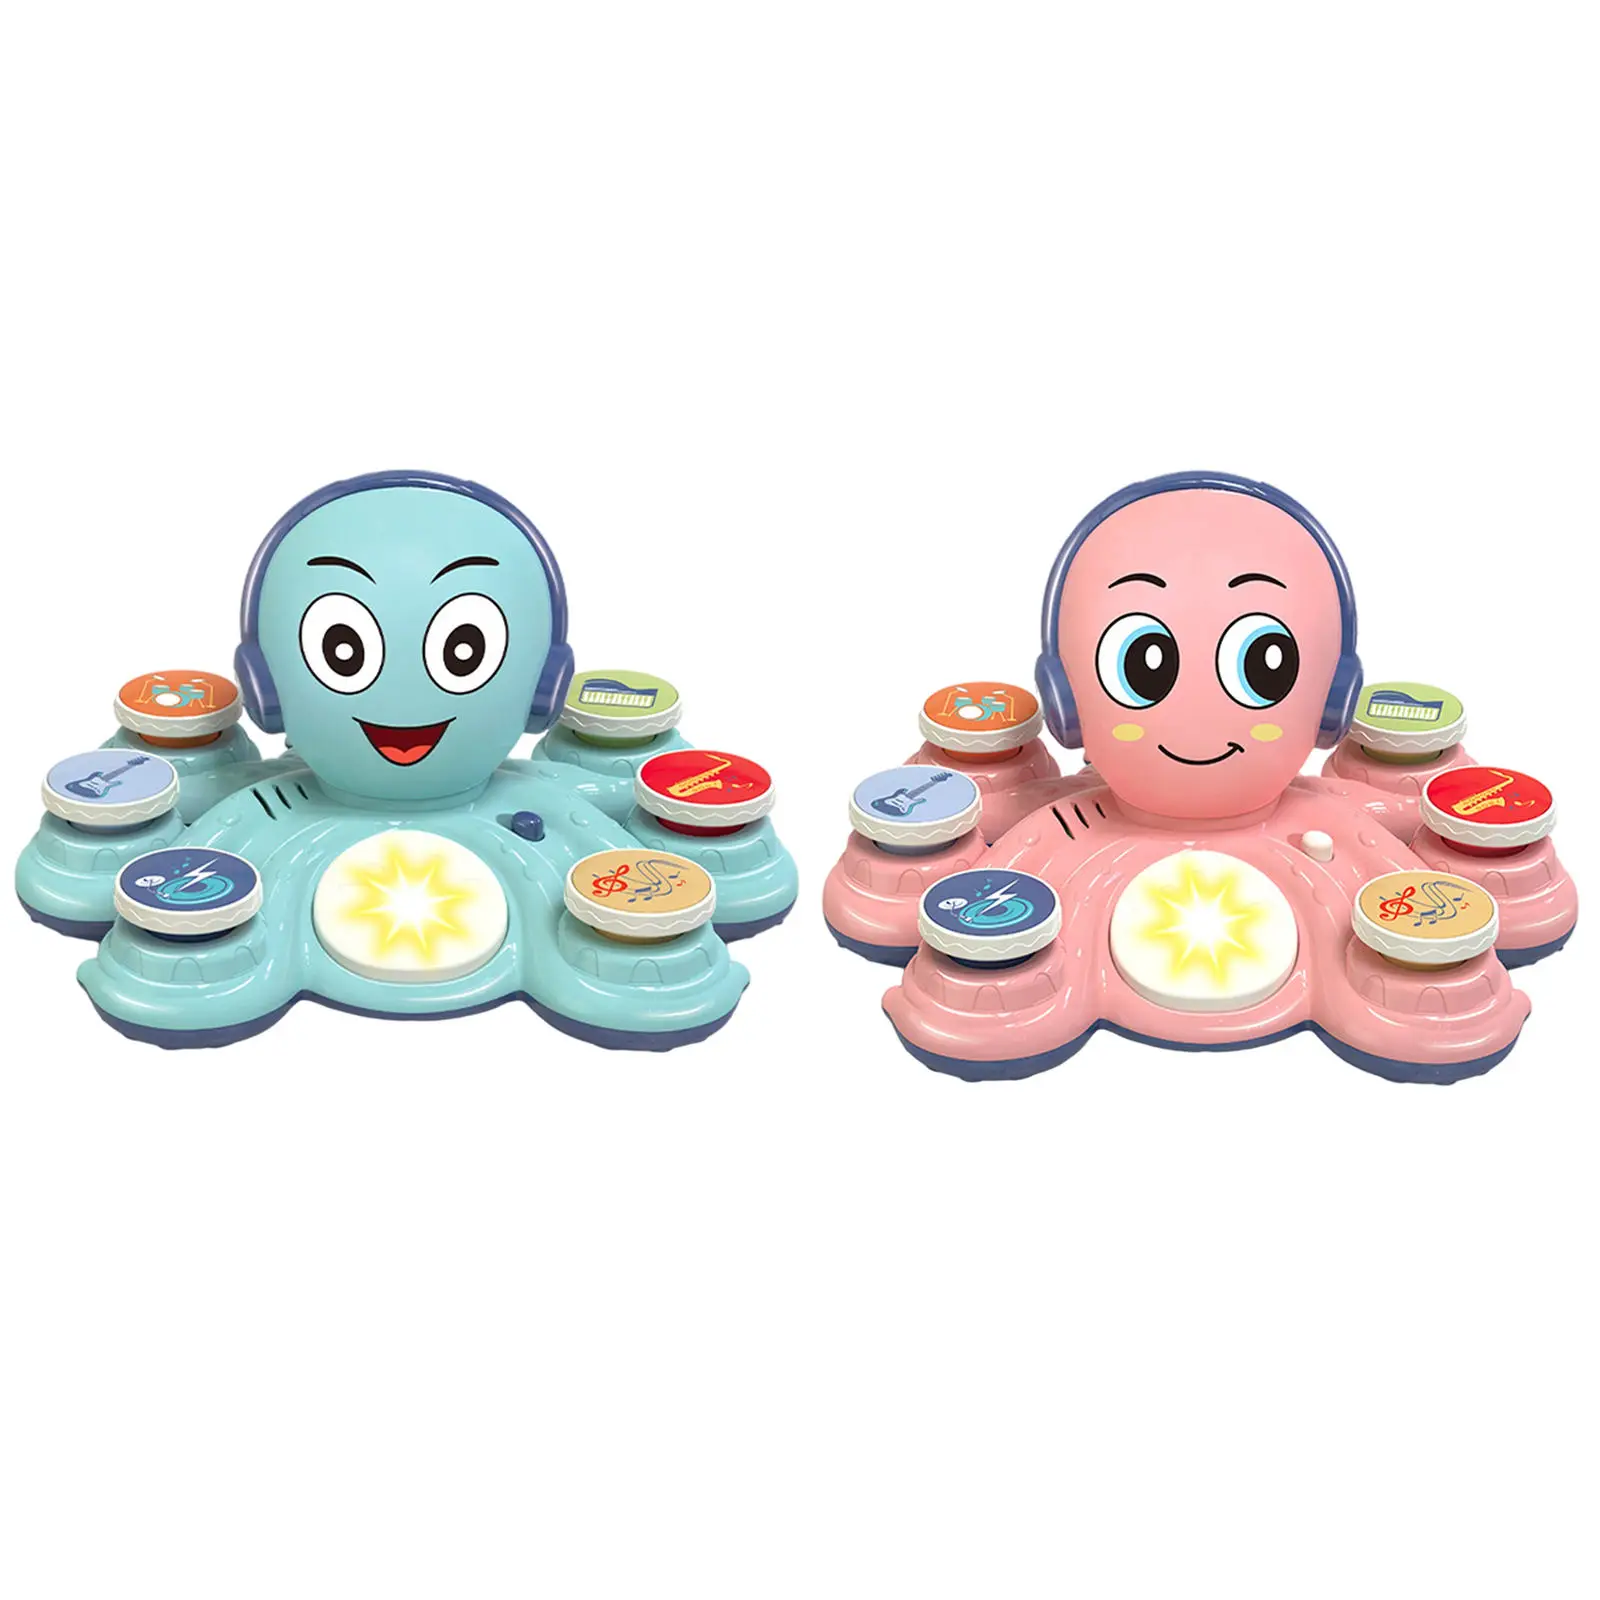 Baby Octopus Hand Drum Musical Instrument Play Rhythm & Sounds Toys for 6-12Month Kids